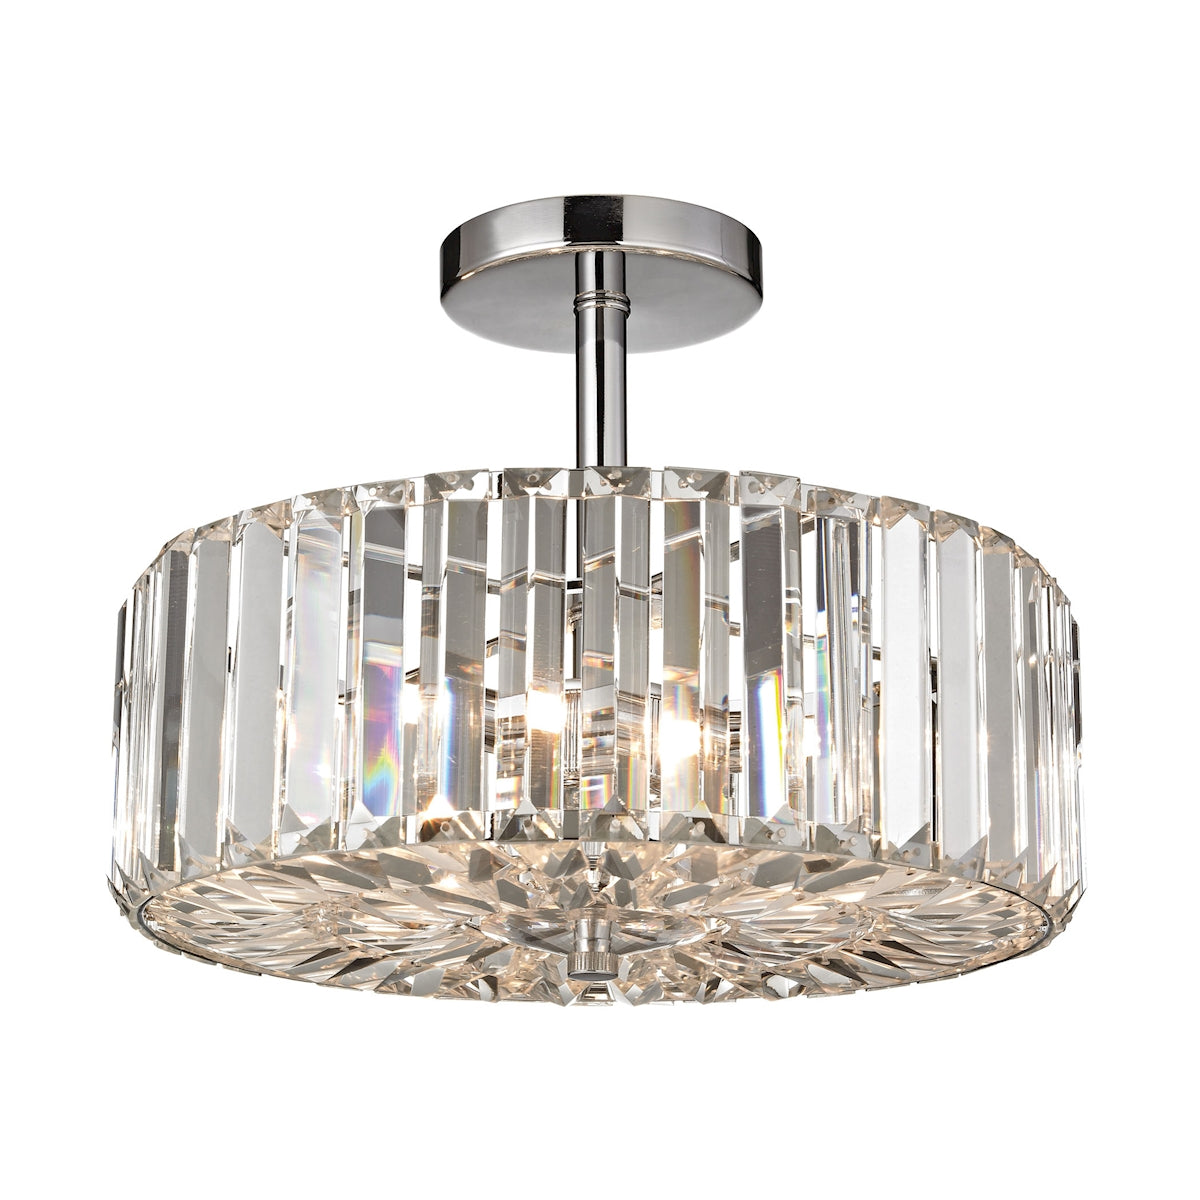 ELK Lighting 46185/3 Clearview 3-Light Semi Flush in Polished Chrome with Crystal Prisms